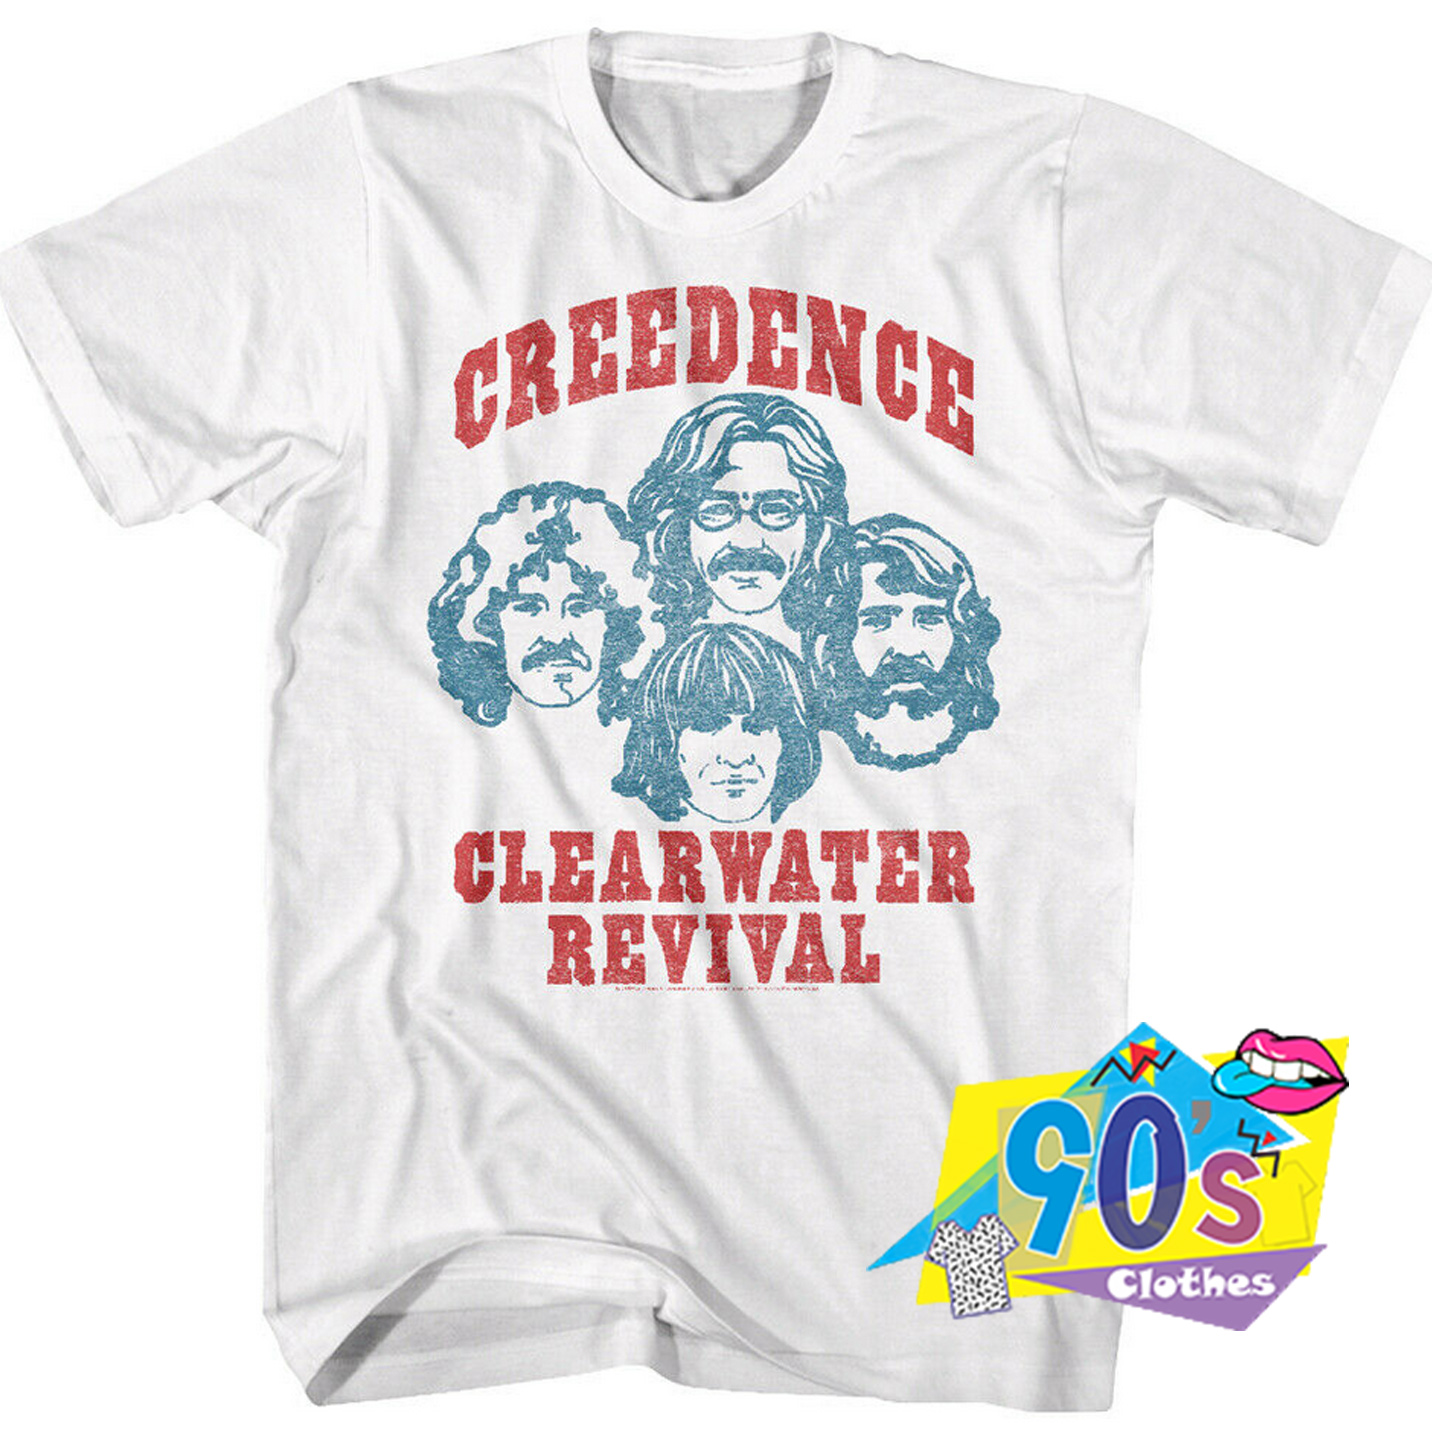 Creedence Clearwater Revival Riverboat T Shirt Mens Licensed Rock Band Tee Black